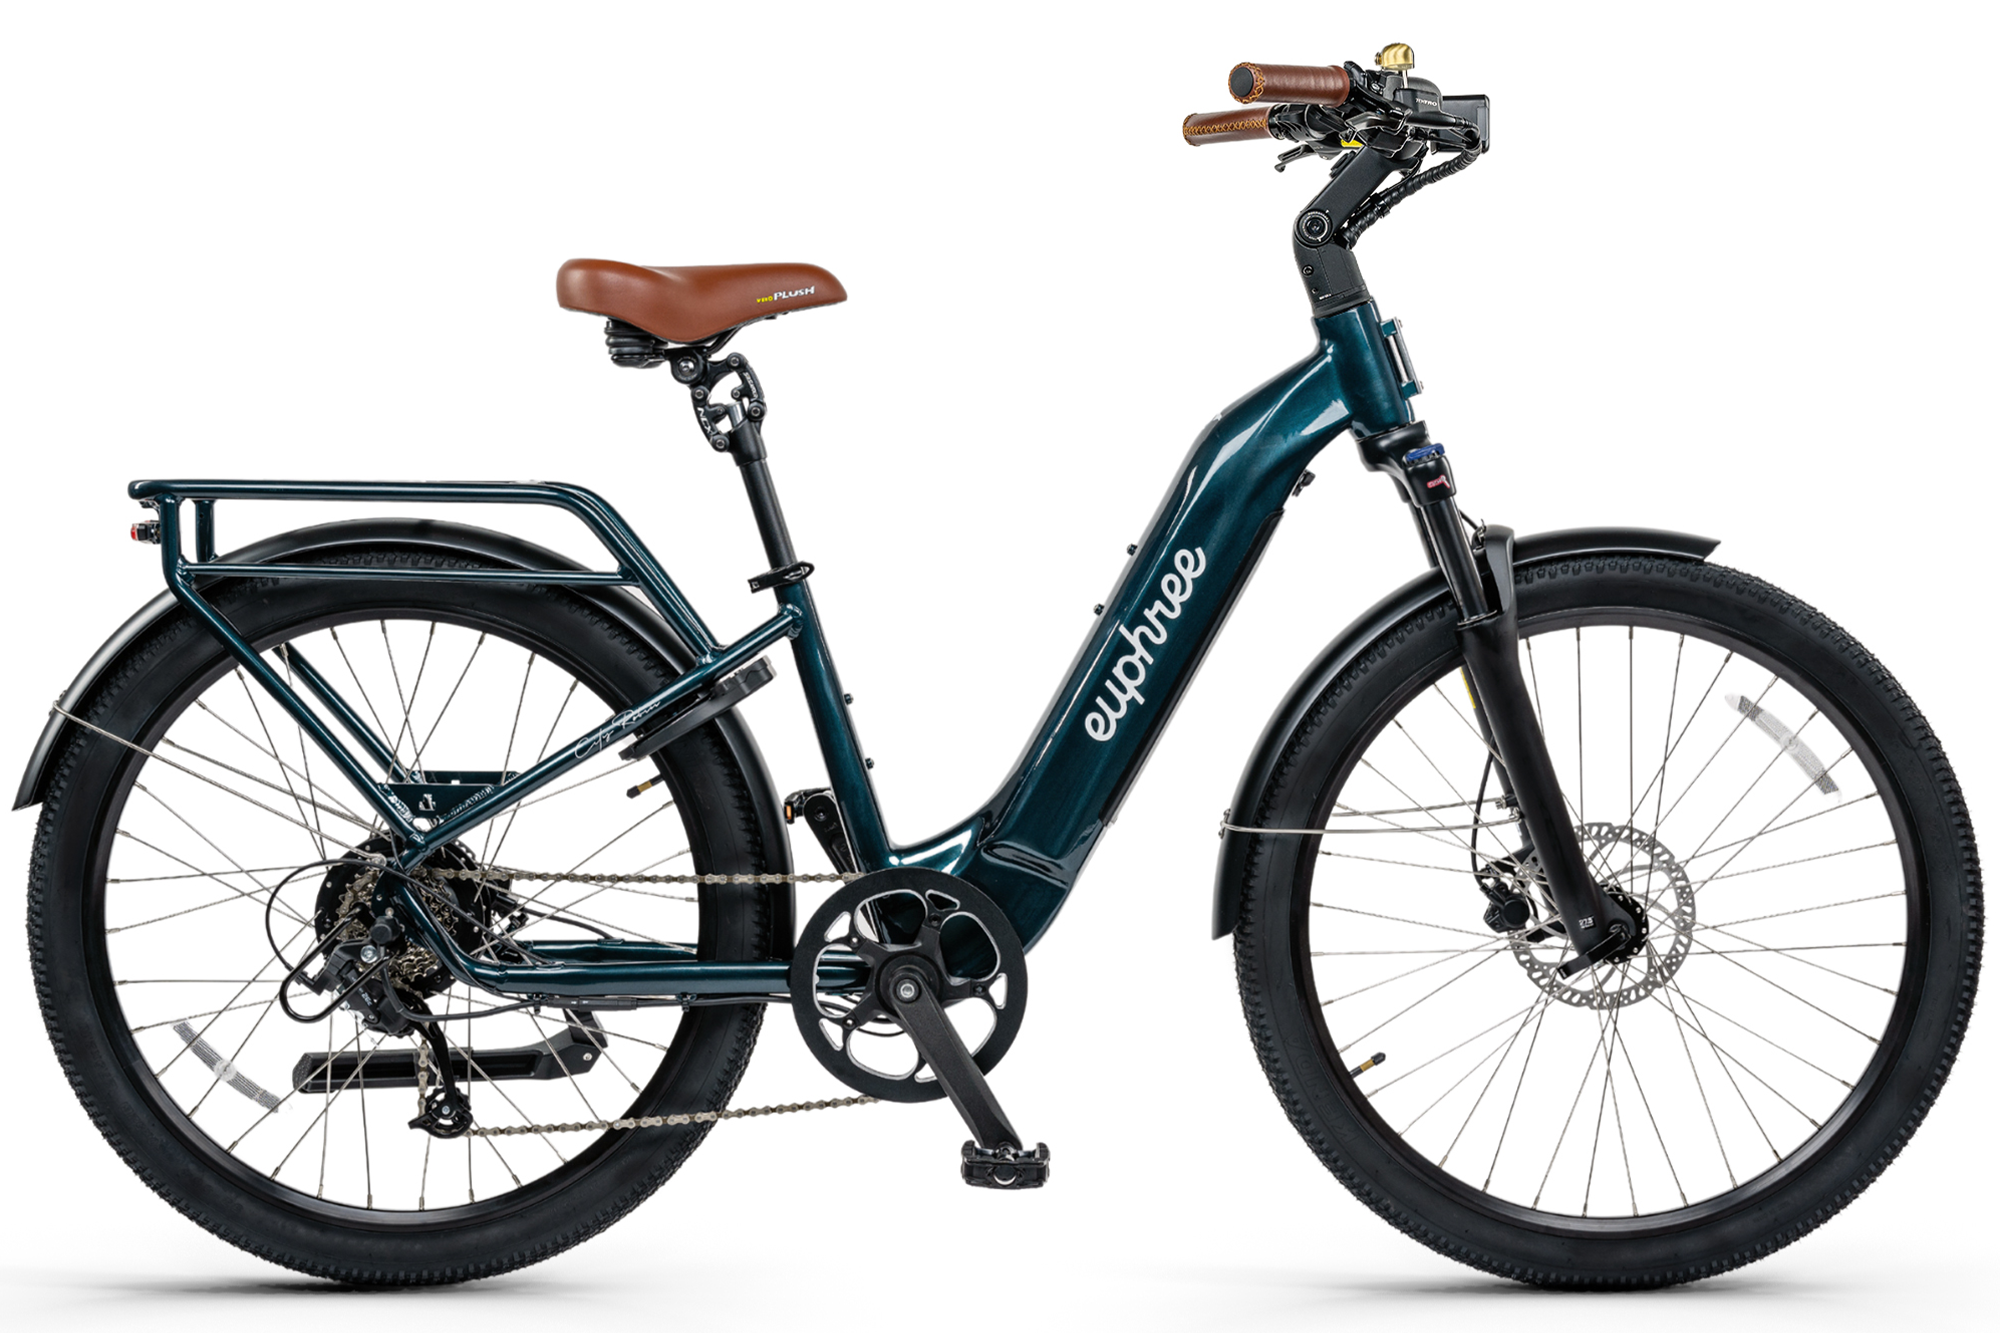 This image showcases the City Robin X+ electric bike by Euphree, resplendent in a radiant Emerald Green color. The vibrant green hue imbues the bike with a lively, energetic aura that matches its high-performance features. The step-through frame design, catering to an array of riders, is distinct, as are the fully integrated wires that provide a sleek, clutter-free look.